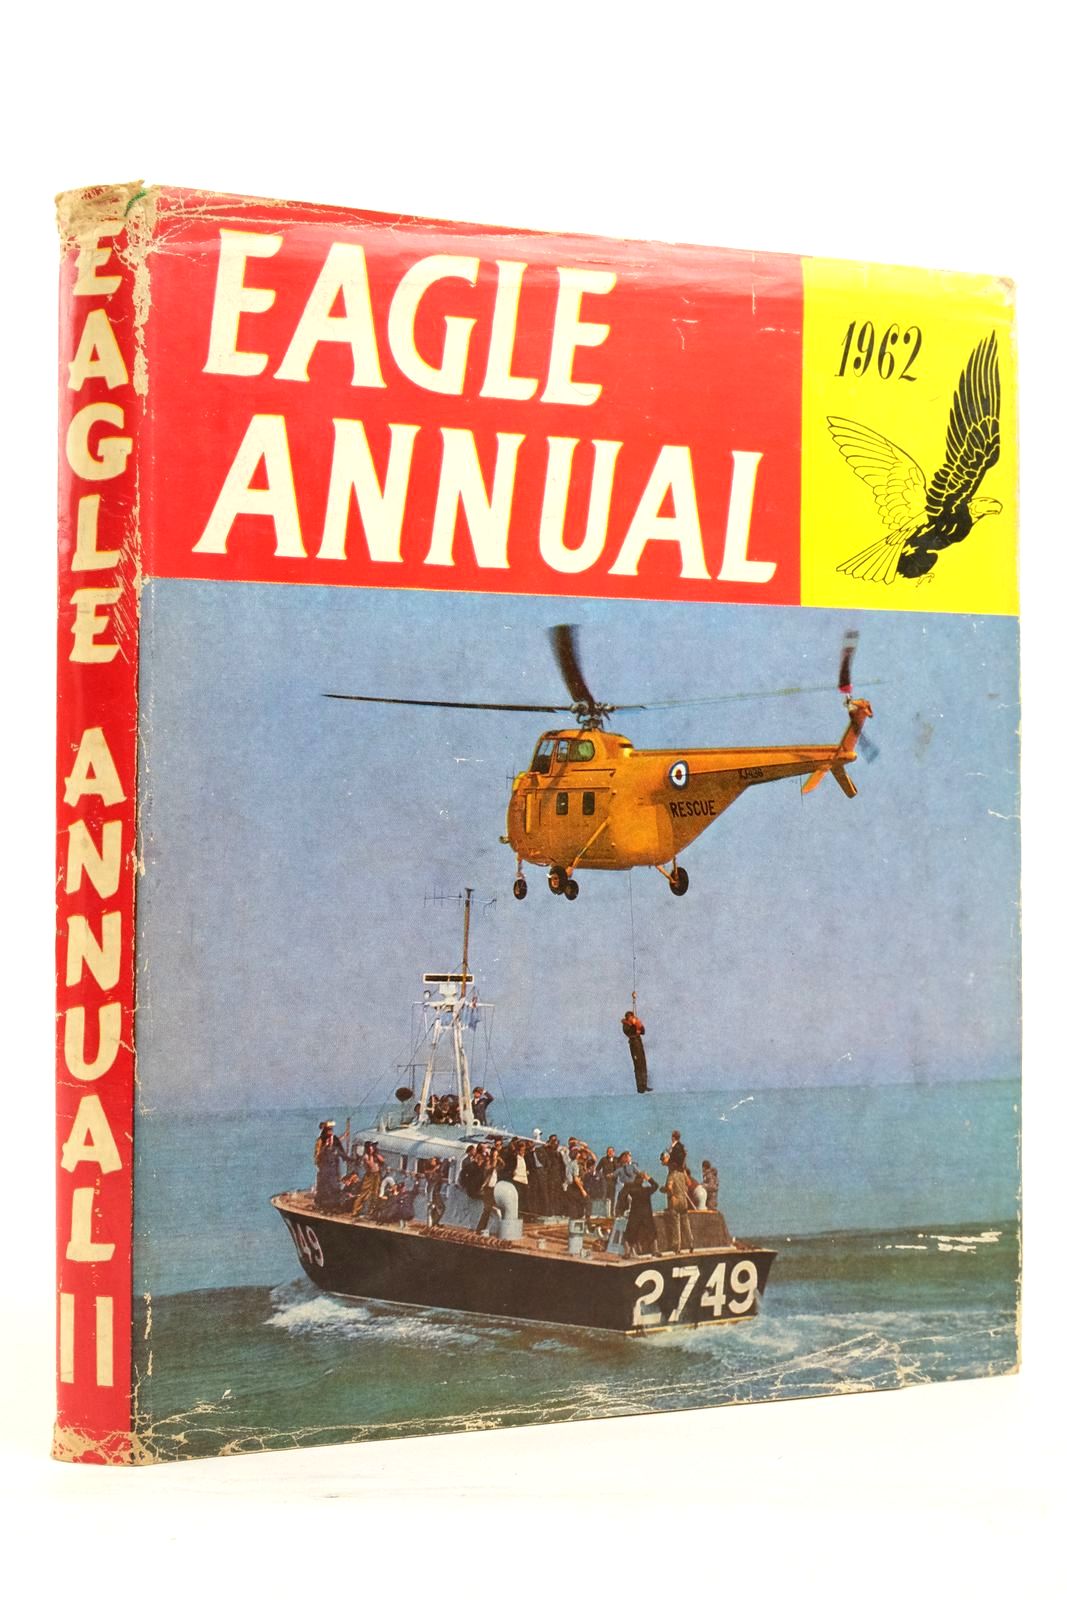 Photo of EAGLE ANNUAL 1962 written by Makins, Clifford published by Longacre Press (STOCK CODE: 2137956)  for sale by Stella & Rose's Books